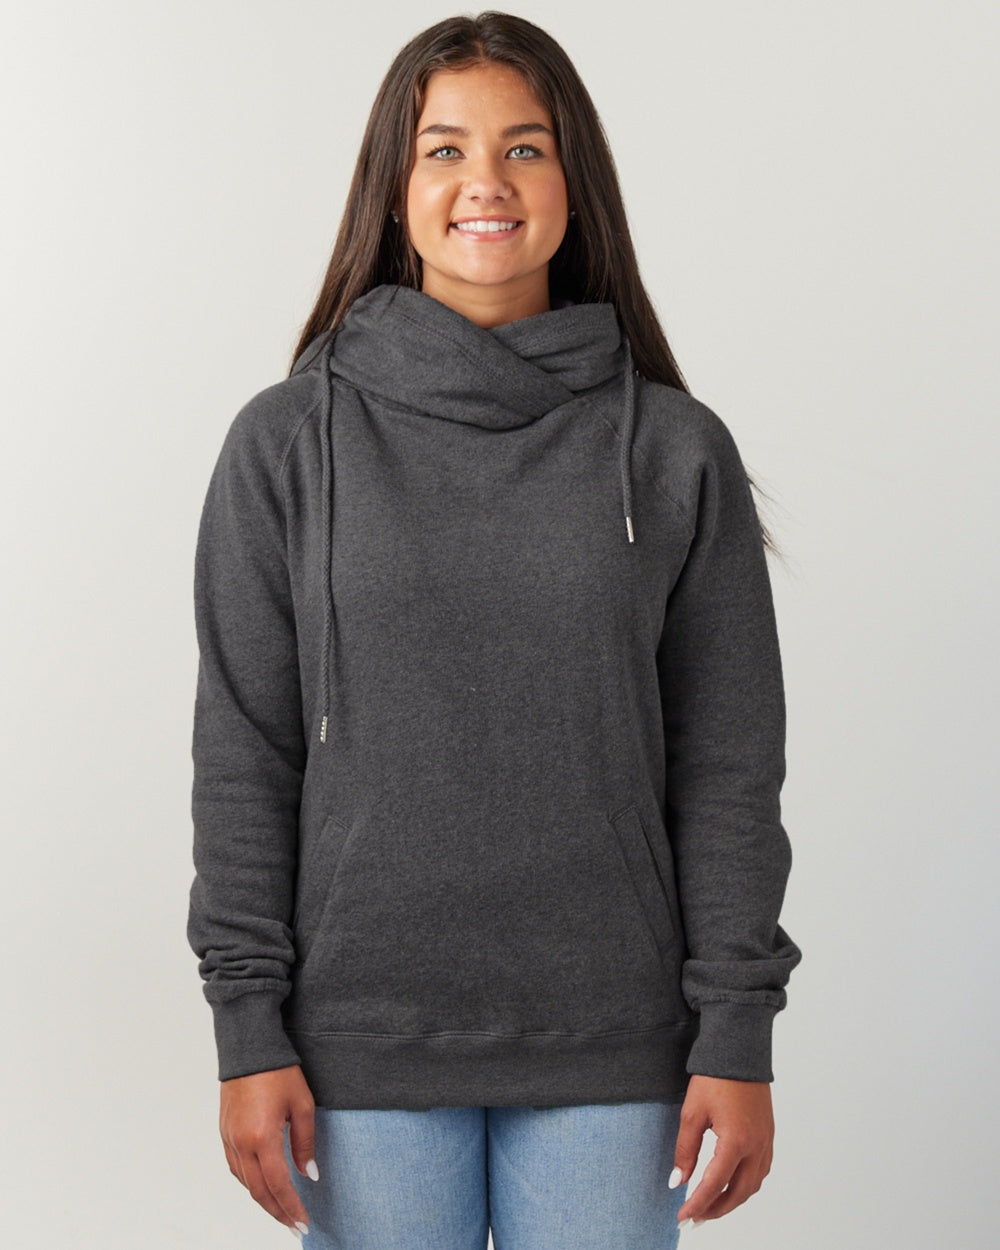 16) (A) STYLE # EZ329 ENZA LADIES FUNNEL NECK HOODED